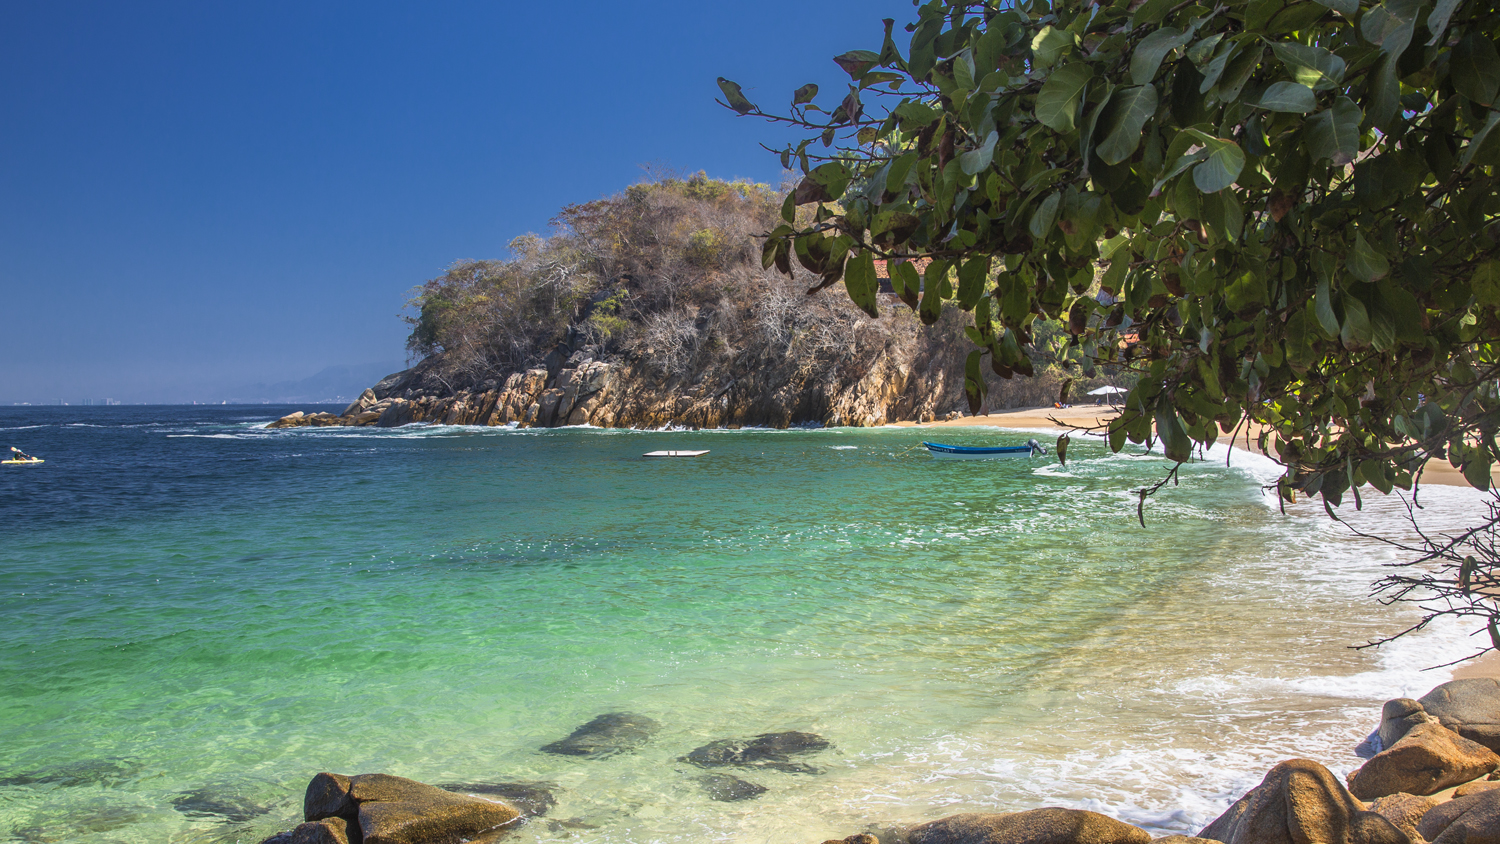 Four south vallarta’s beaches that you must visit